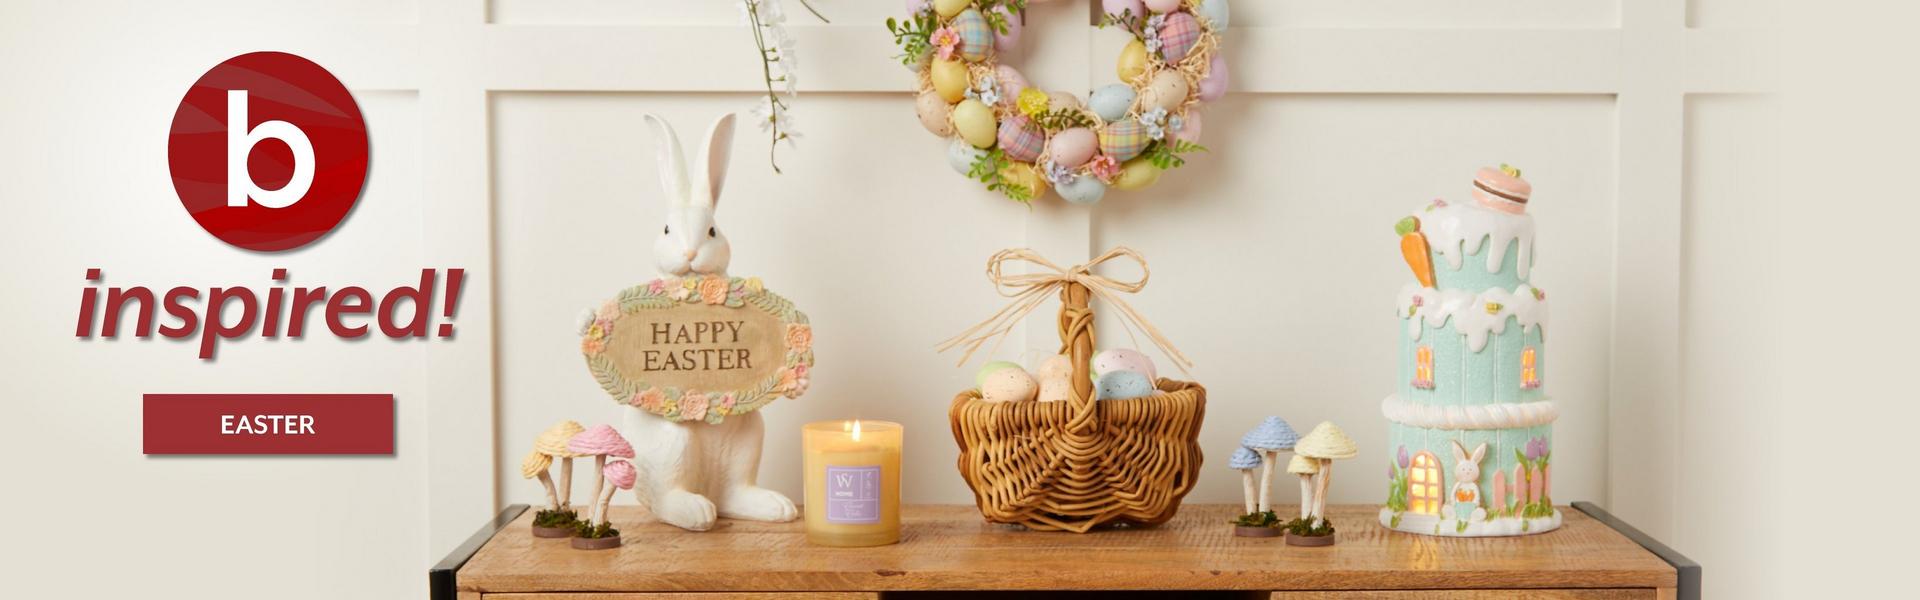 b inspired - shop Easter décor and more at bealls.com